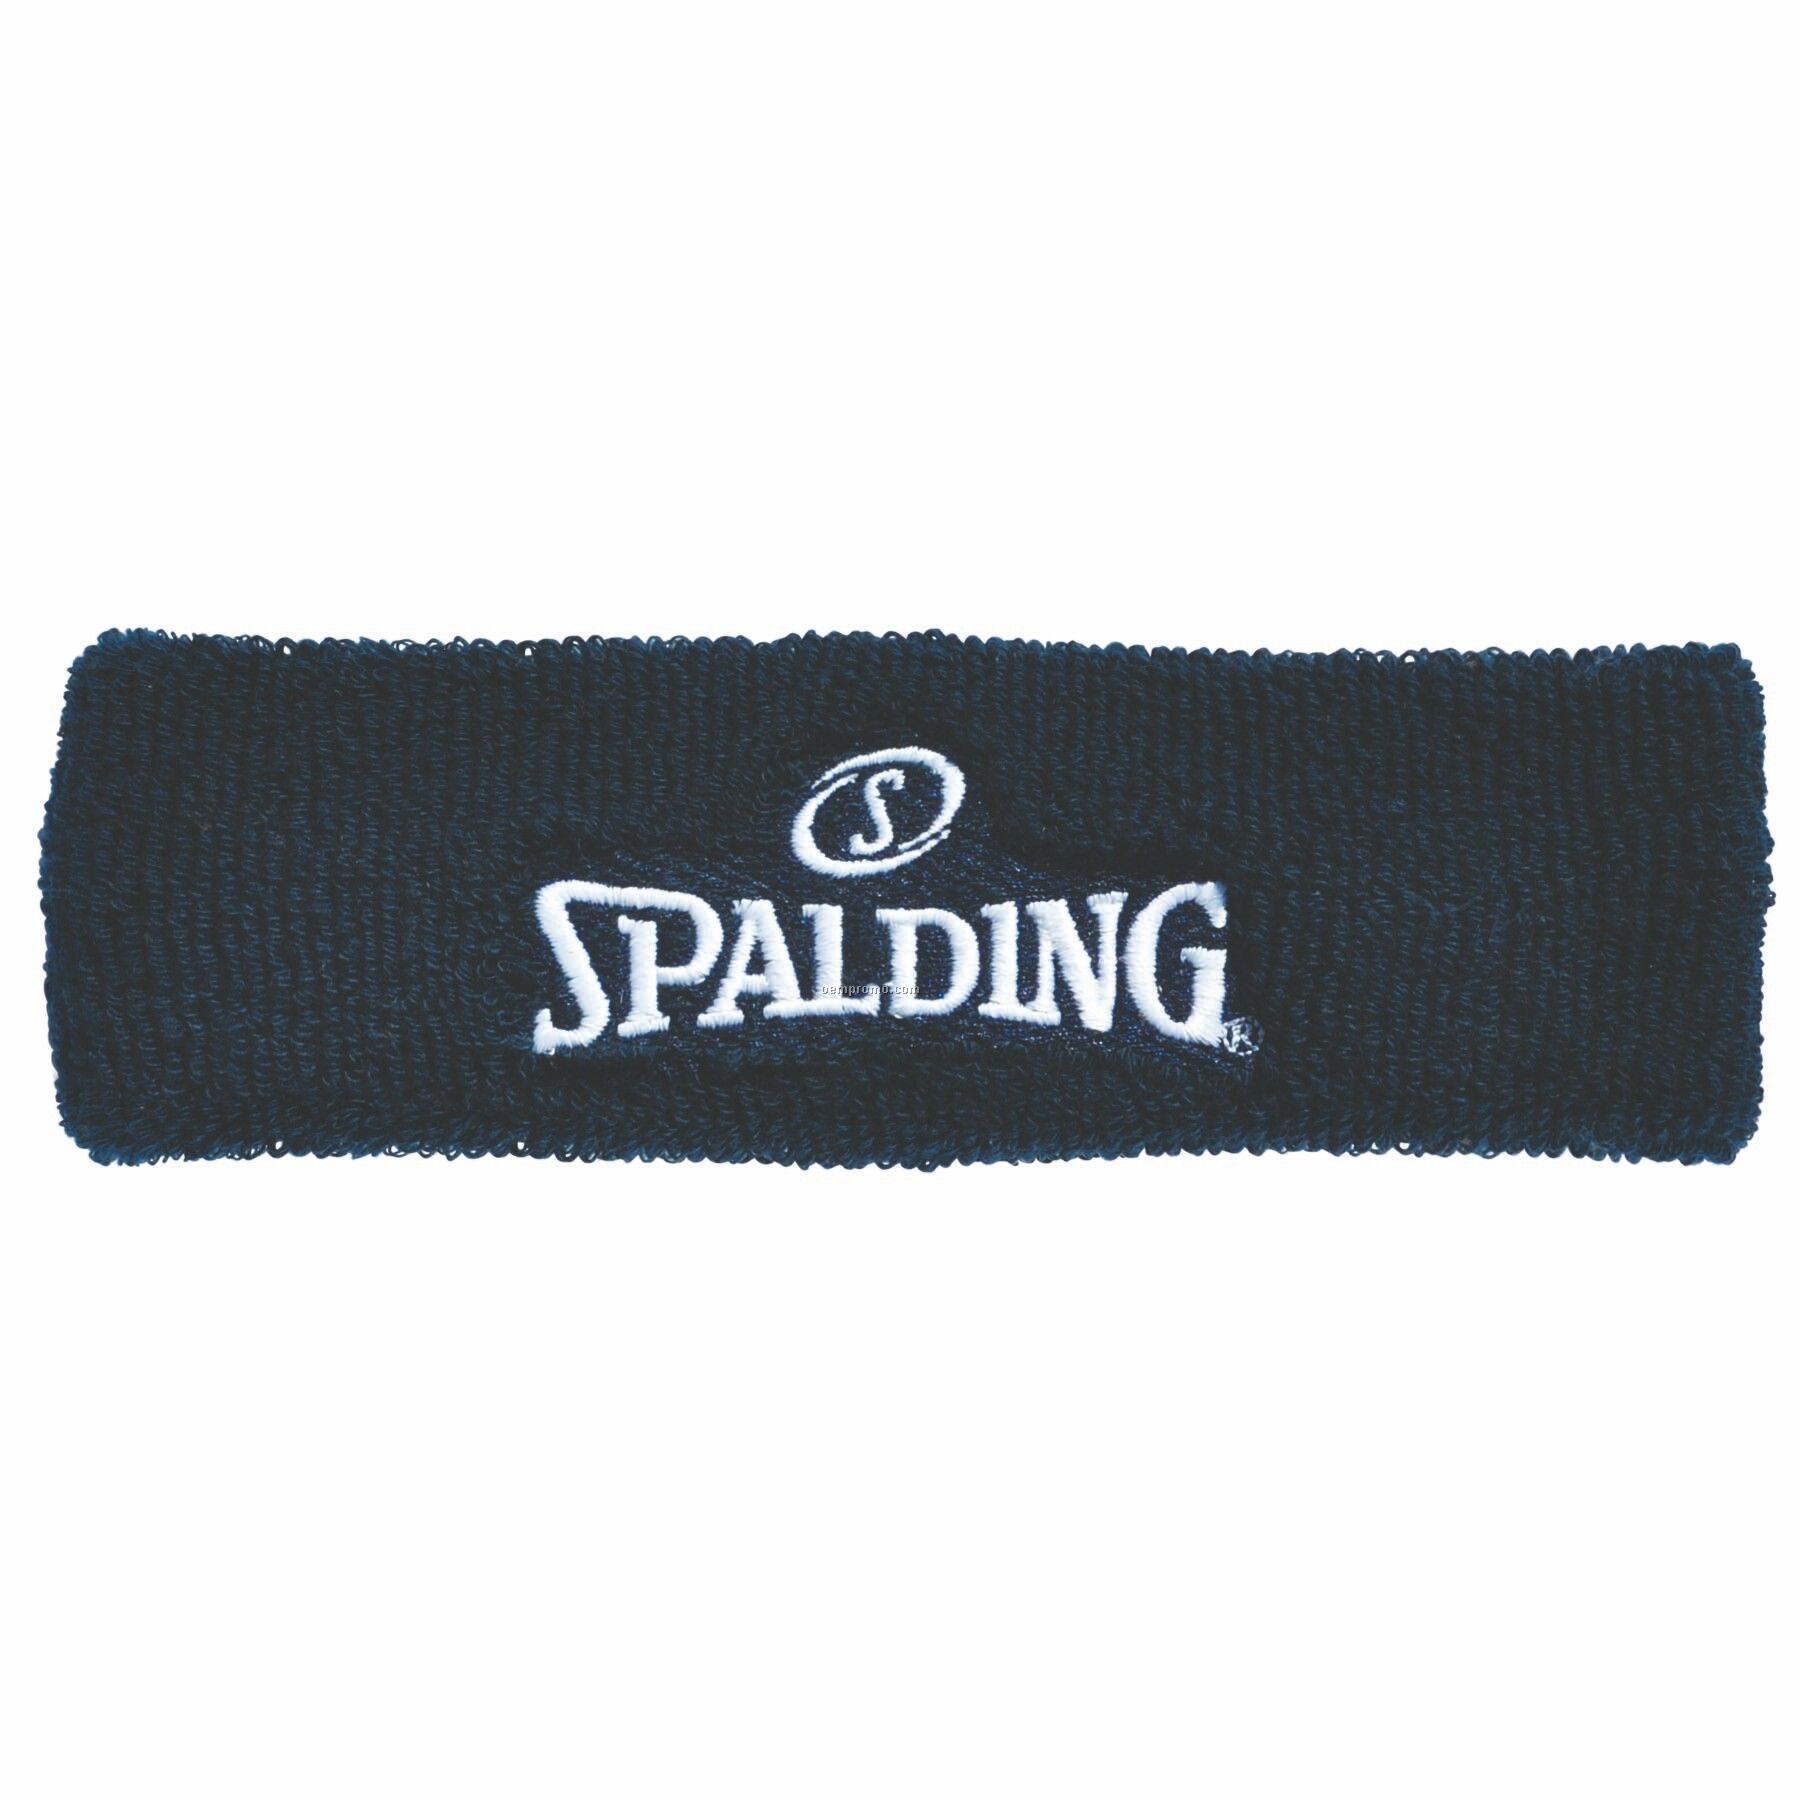 Heavyweight Headband With Direct Embroidery